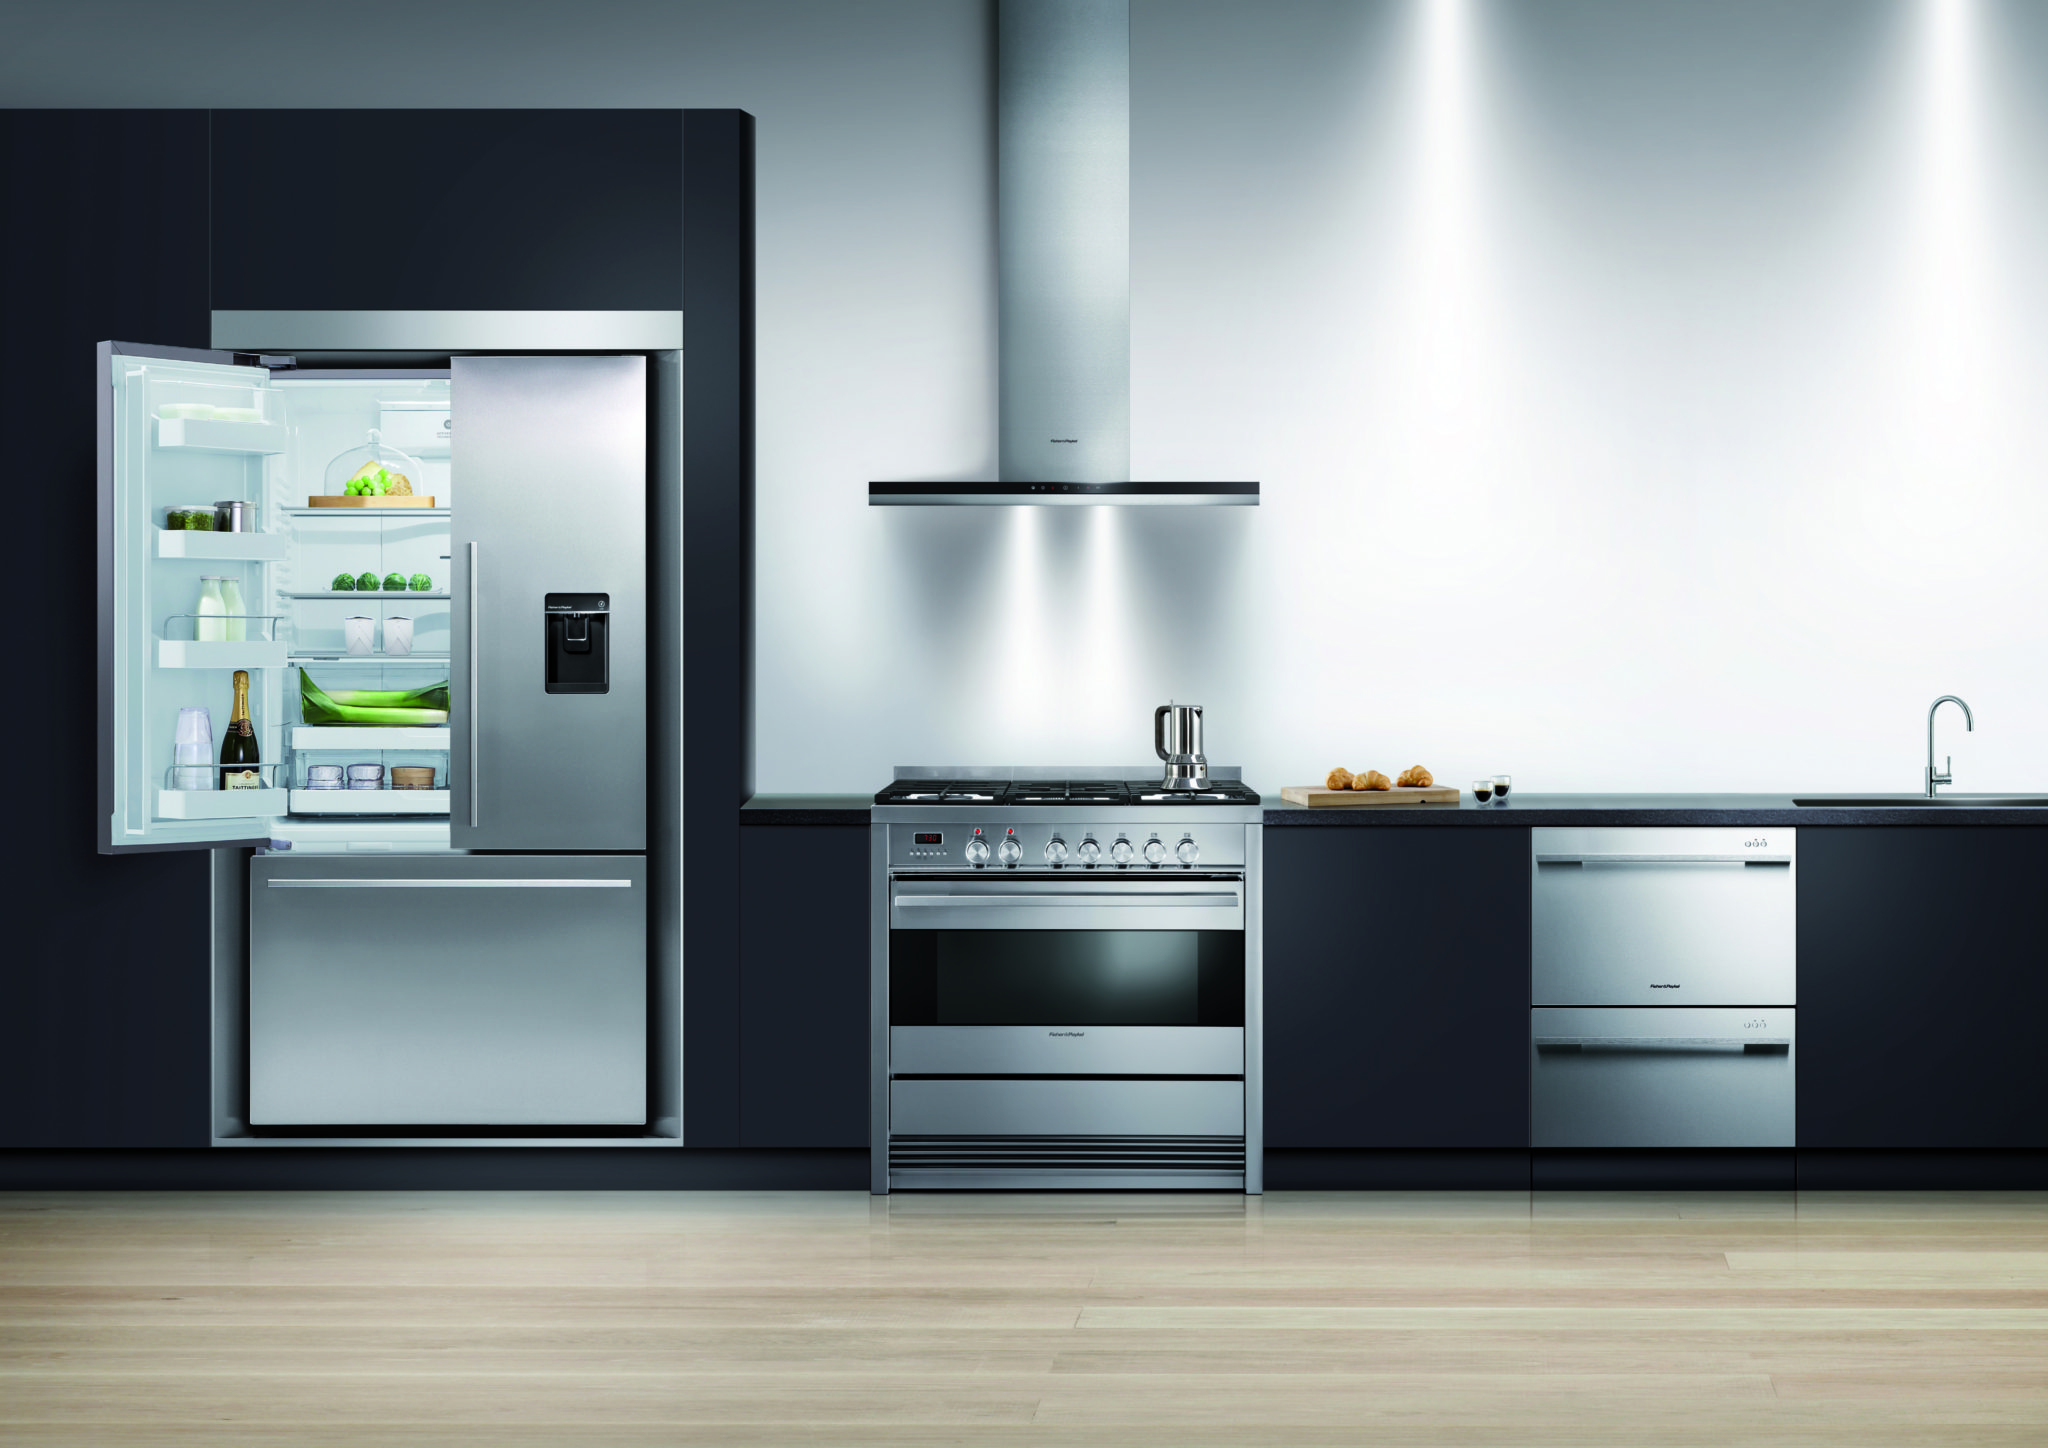 Image: Fisher & Paykel